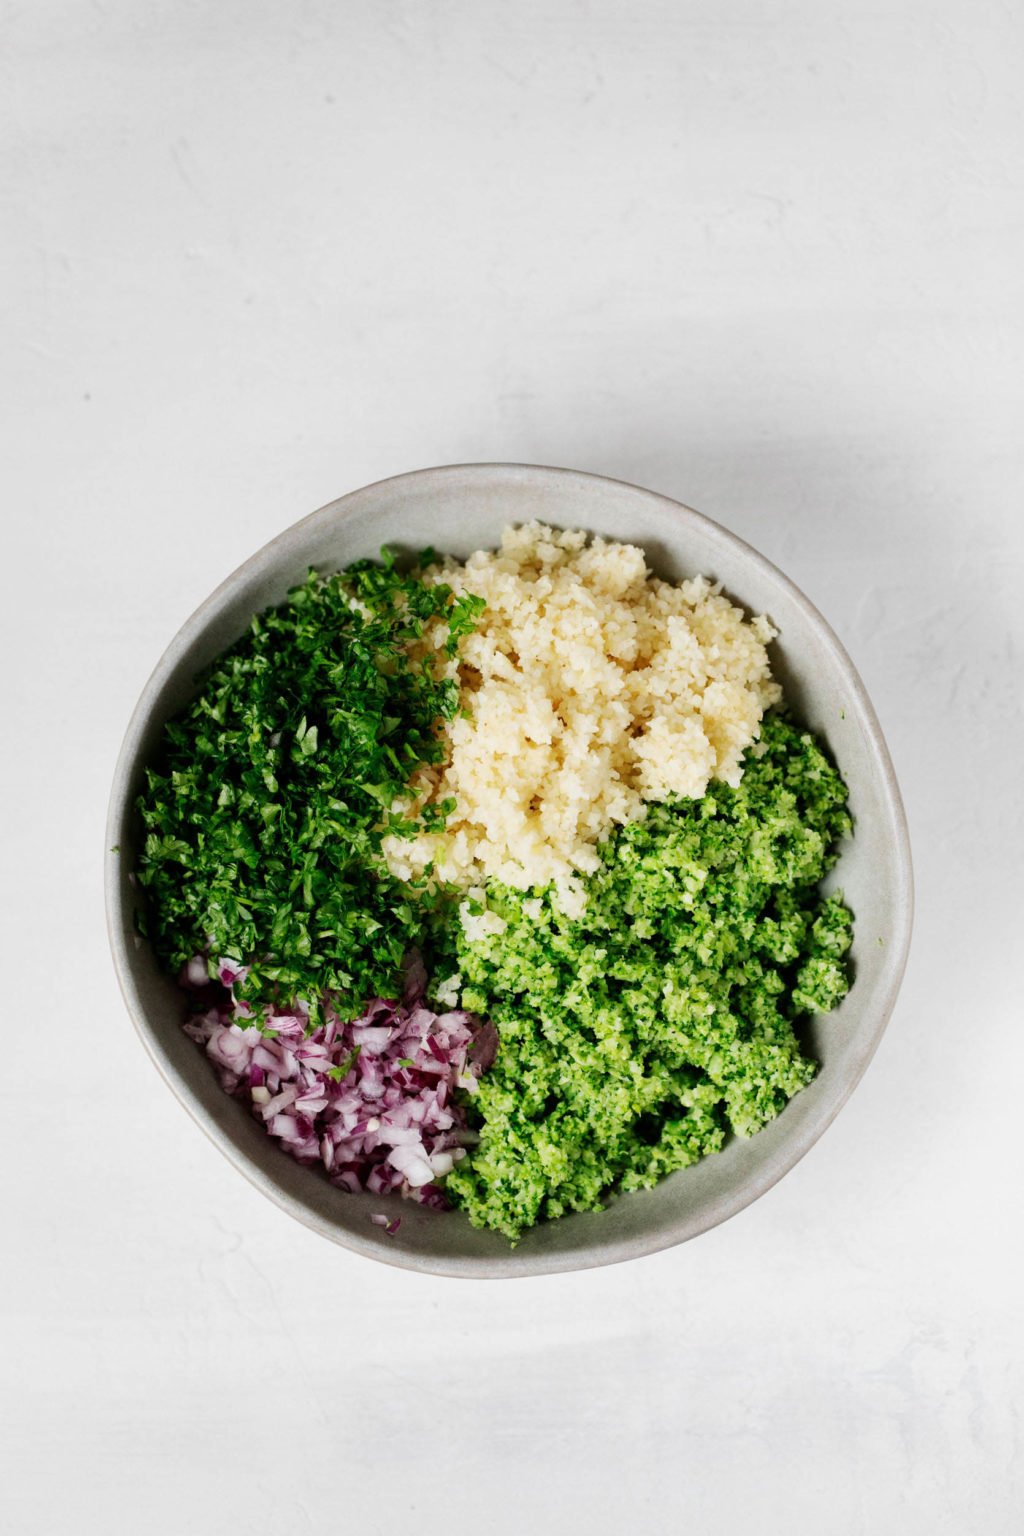 A mixing bowl contains the components for a vibrant, plant-based whole grain salad. The bowl rests on a white surface.